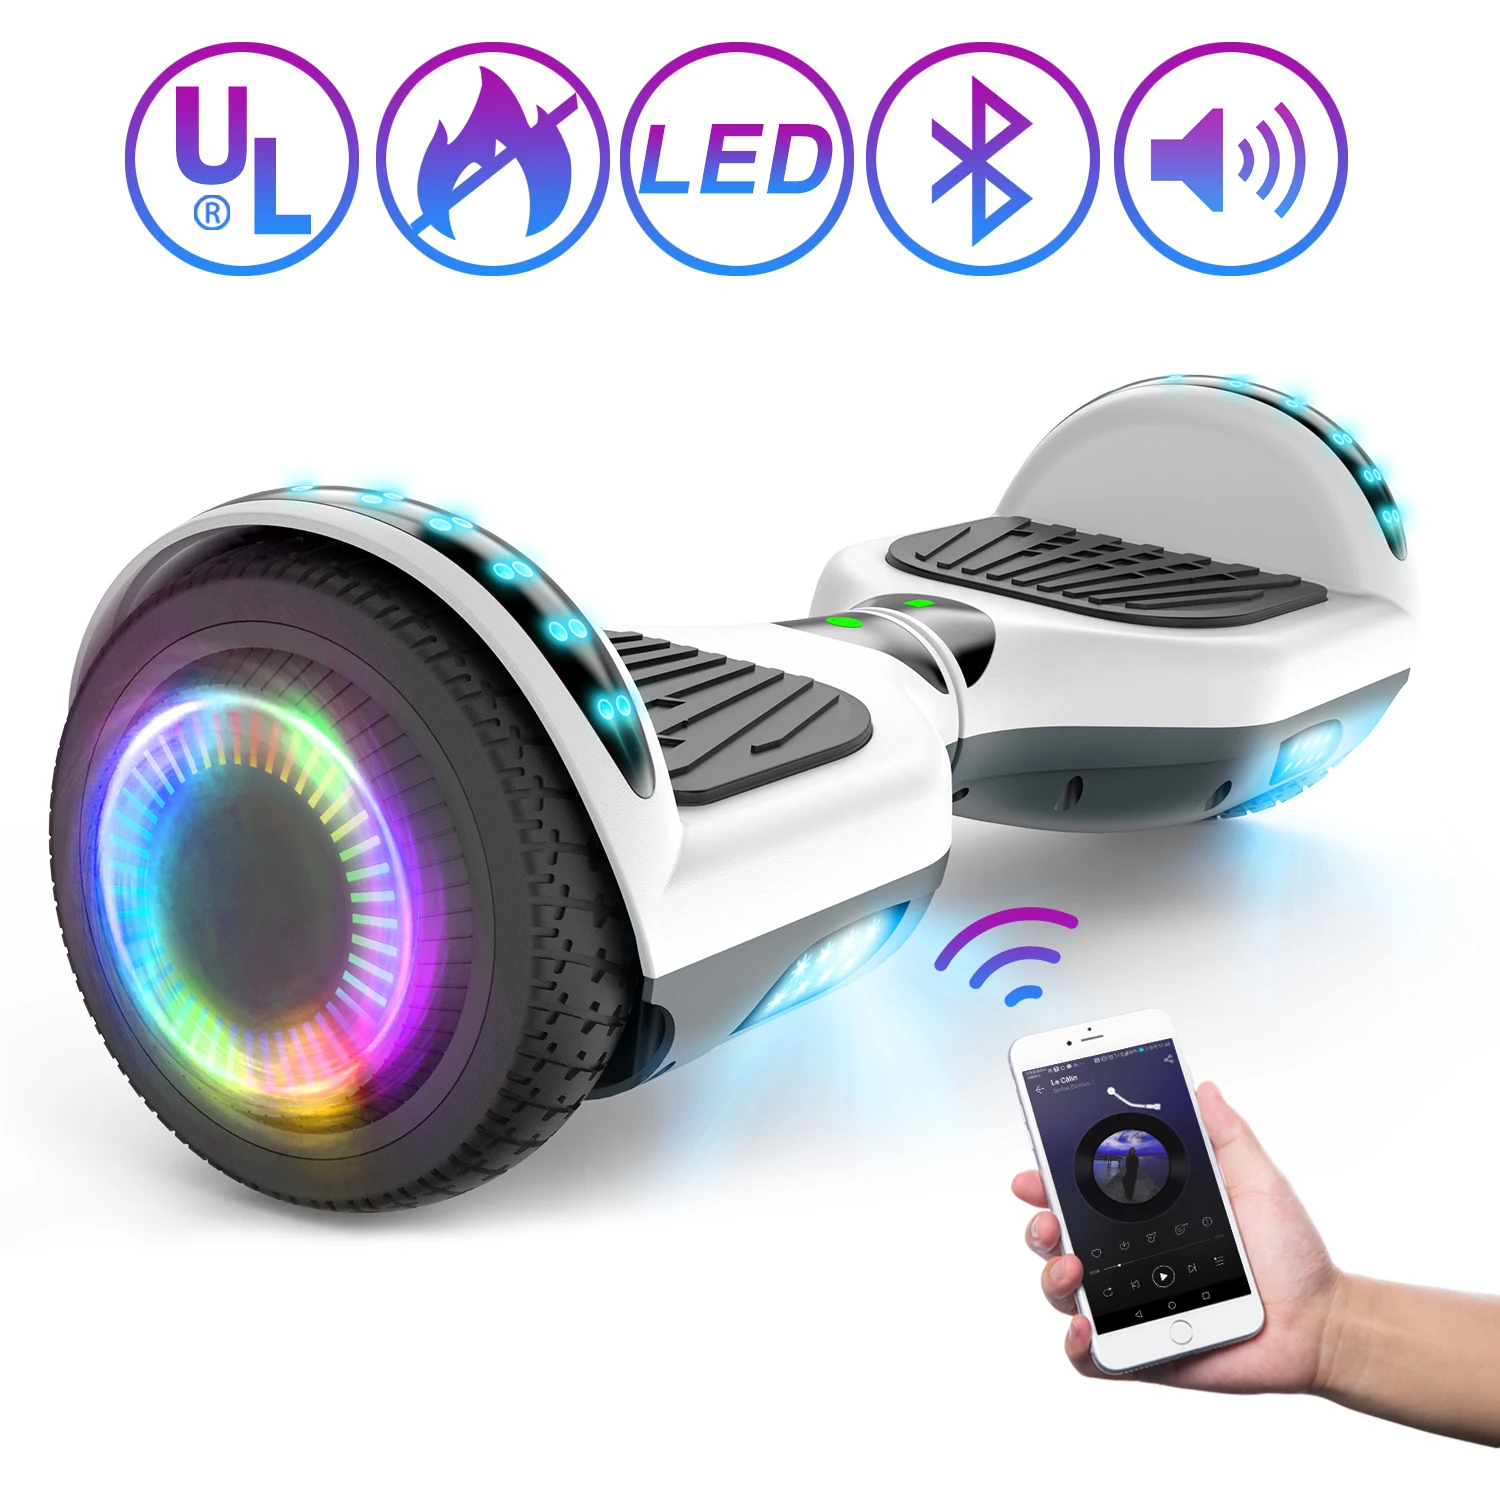 Hoverboard Off Road All Terrain 6.5 In. Self Balancing Hoverboard with LED Lights and Bluetooth Hoverboard for Adult Kids Gift W